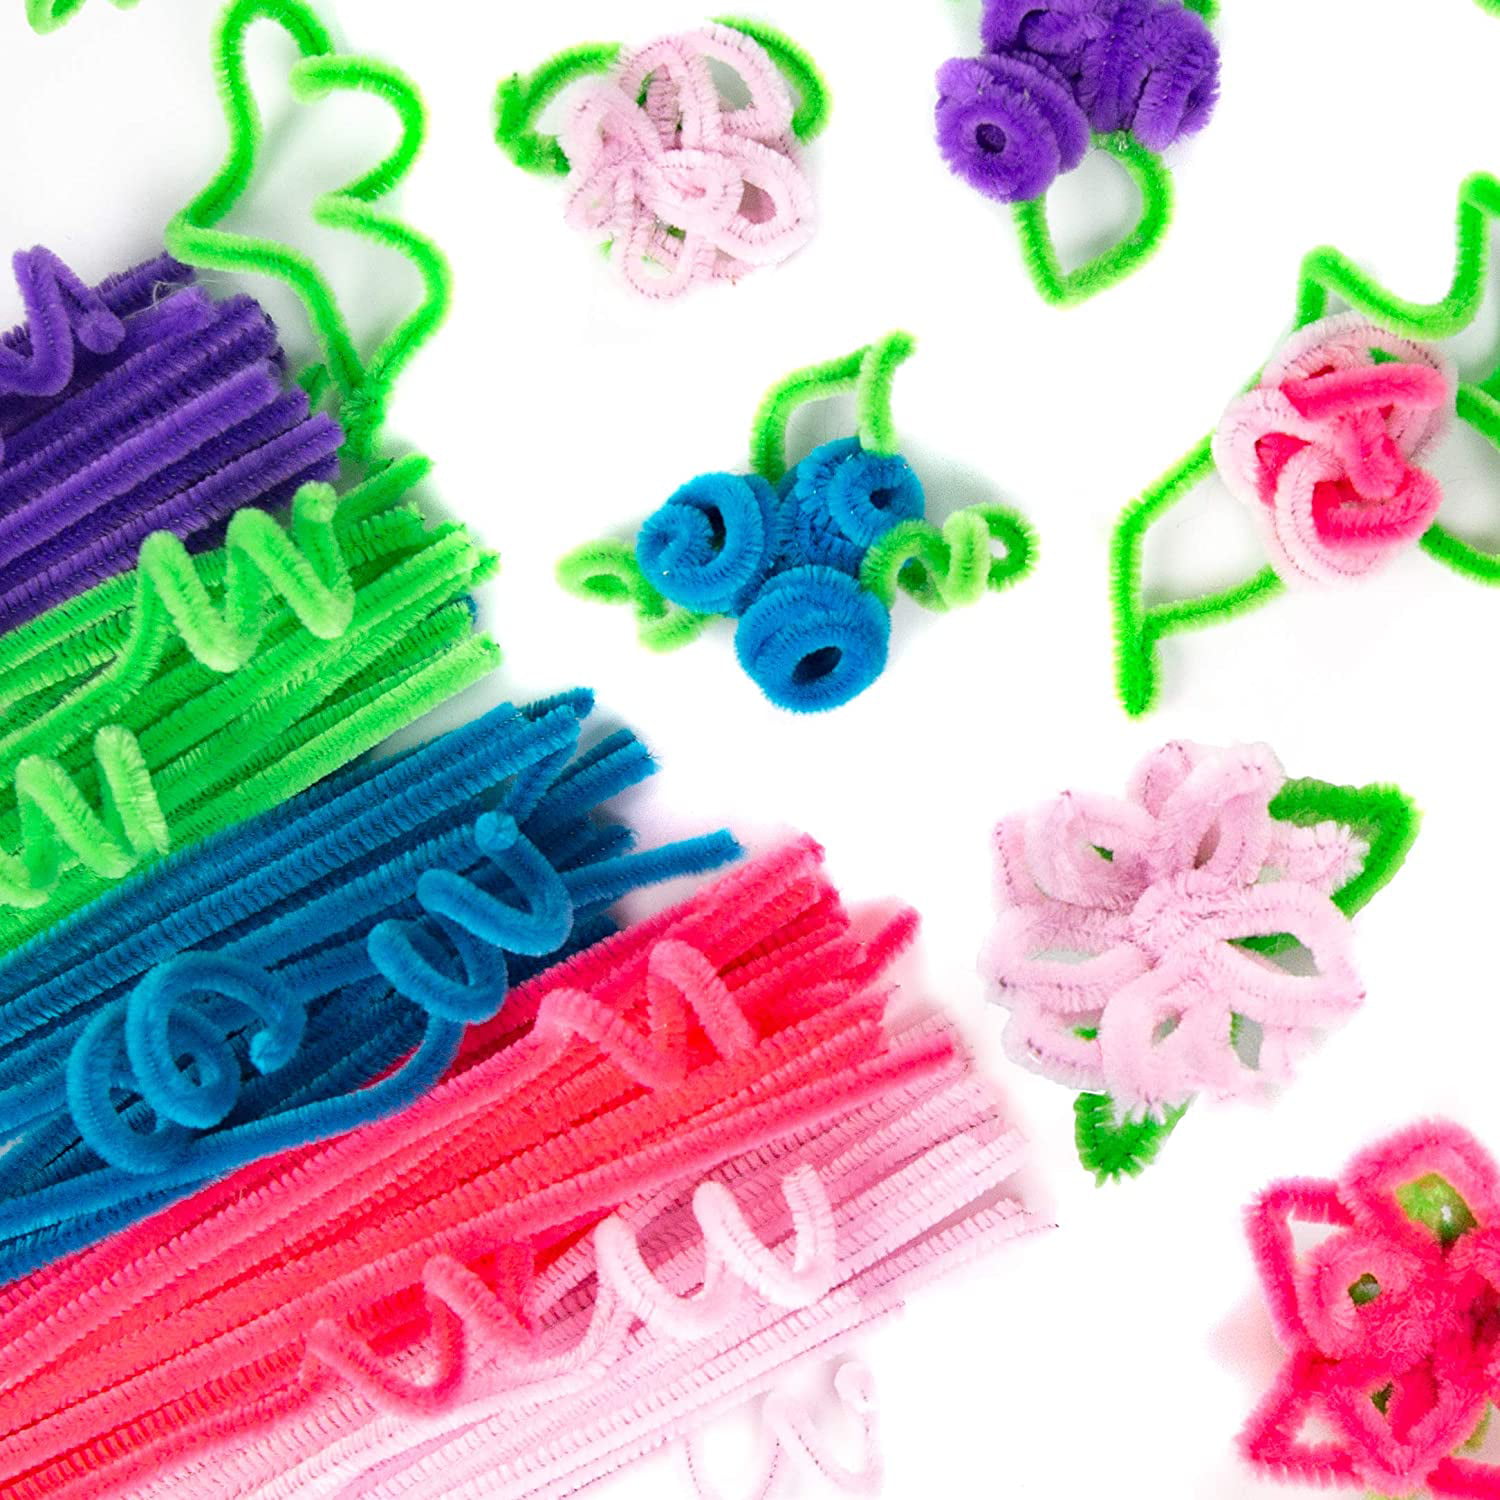 12 Inches Long Pastel Spring Colors Fuzzy Craft Sticks Pipe Cleaners 40 Count 